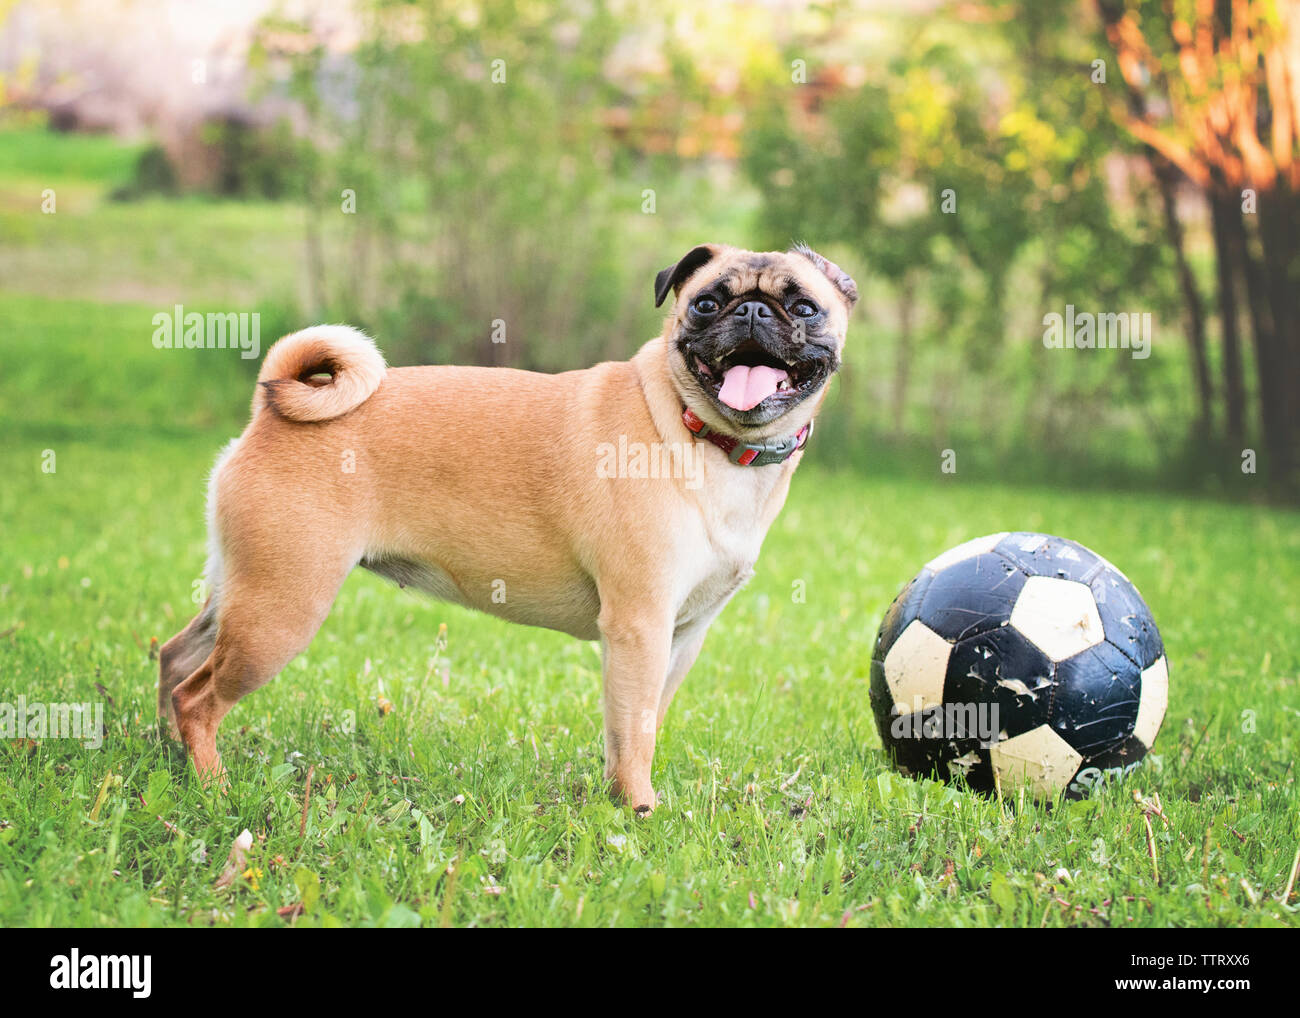 Pug sticking out tongue while standing by ball at park Stock Photo